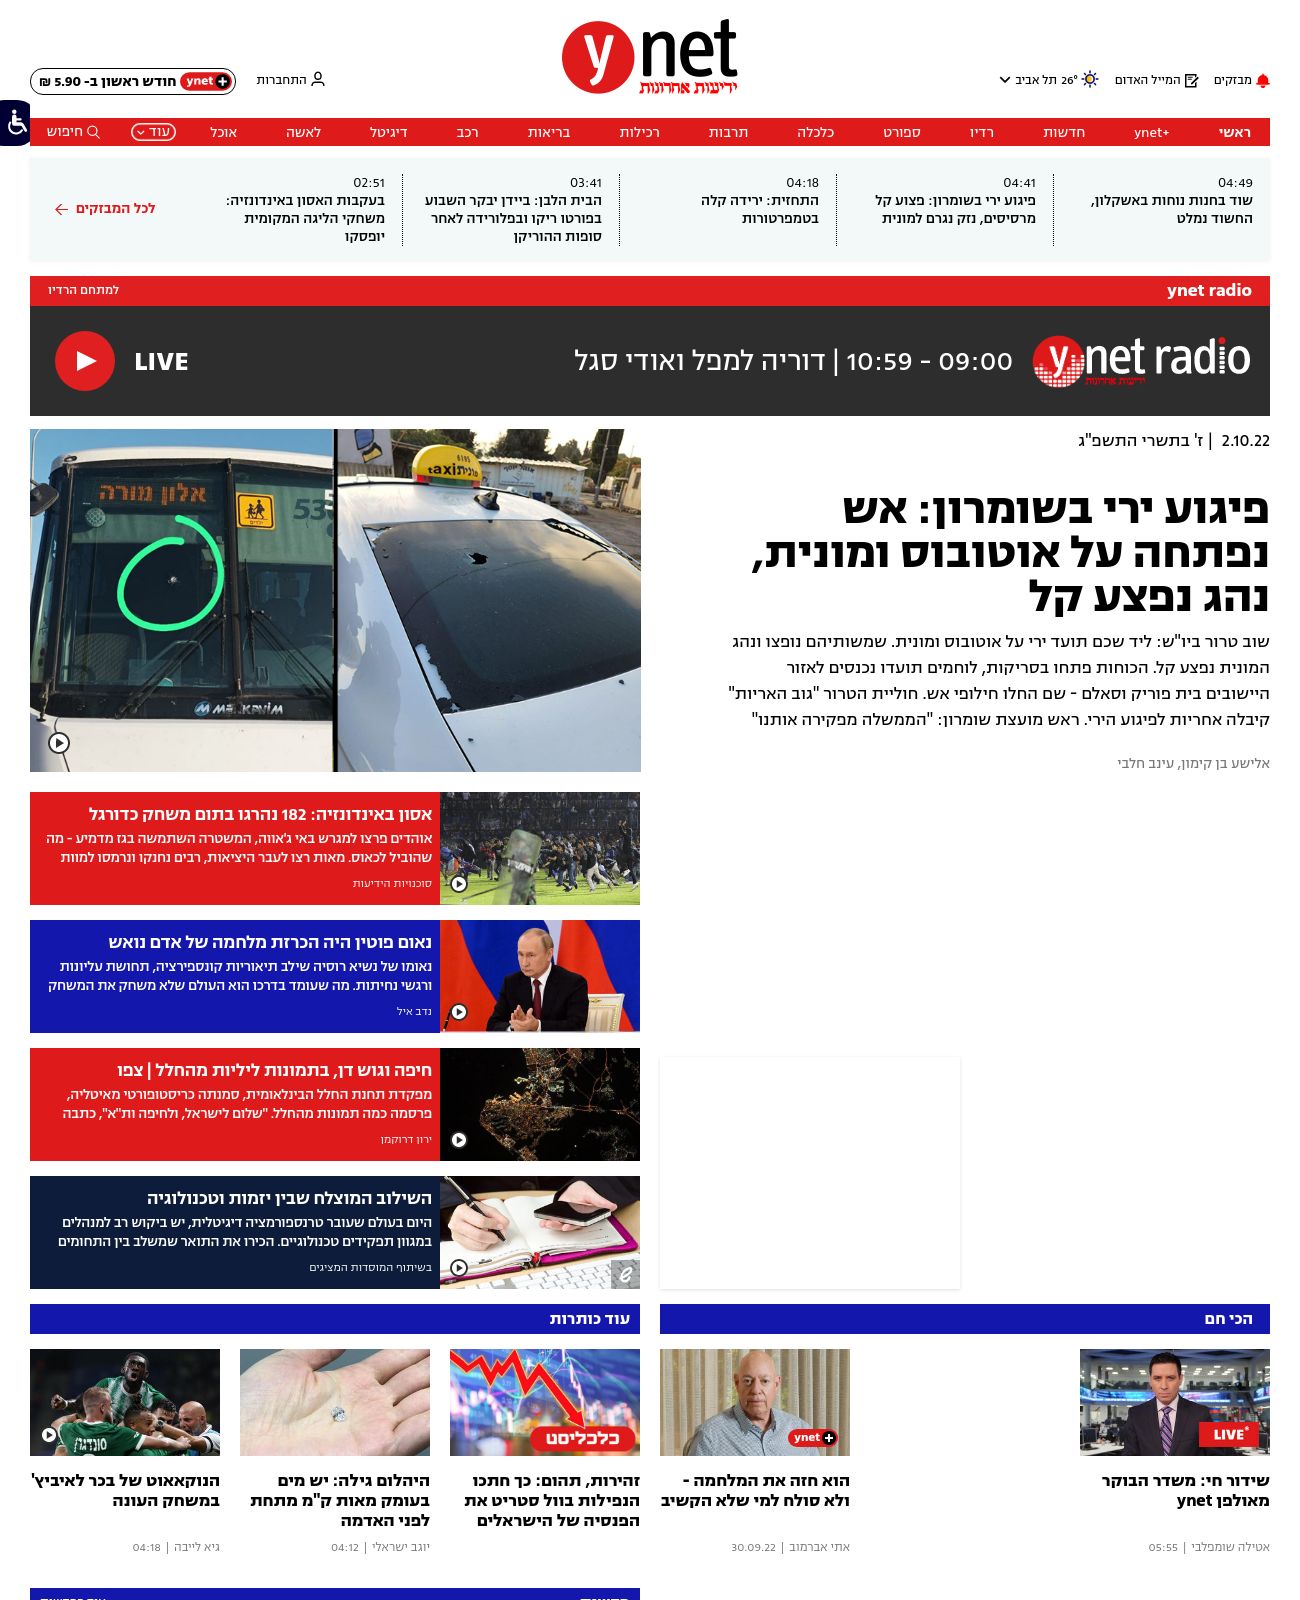 Ynet at 2022-10-02 10:18:17+03:00 local time